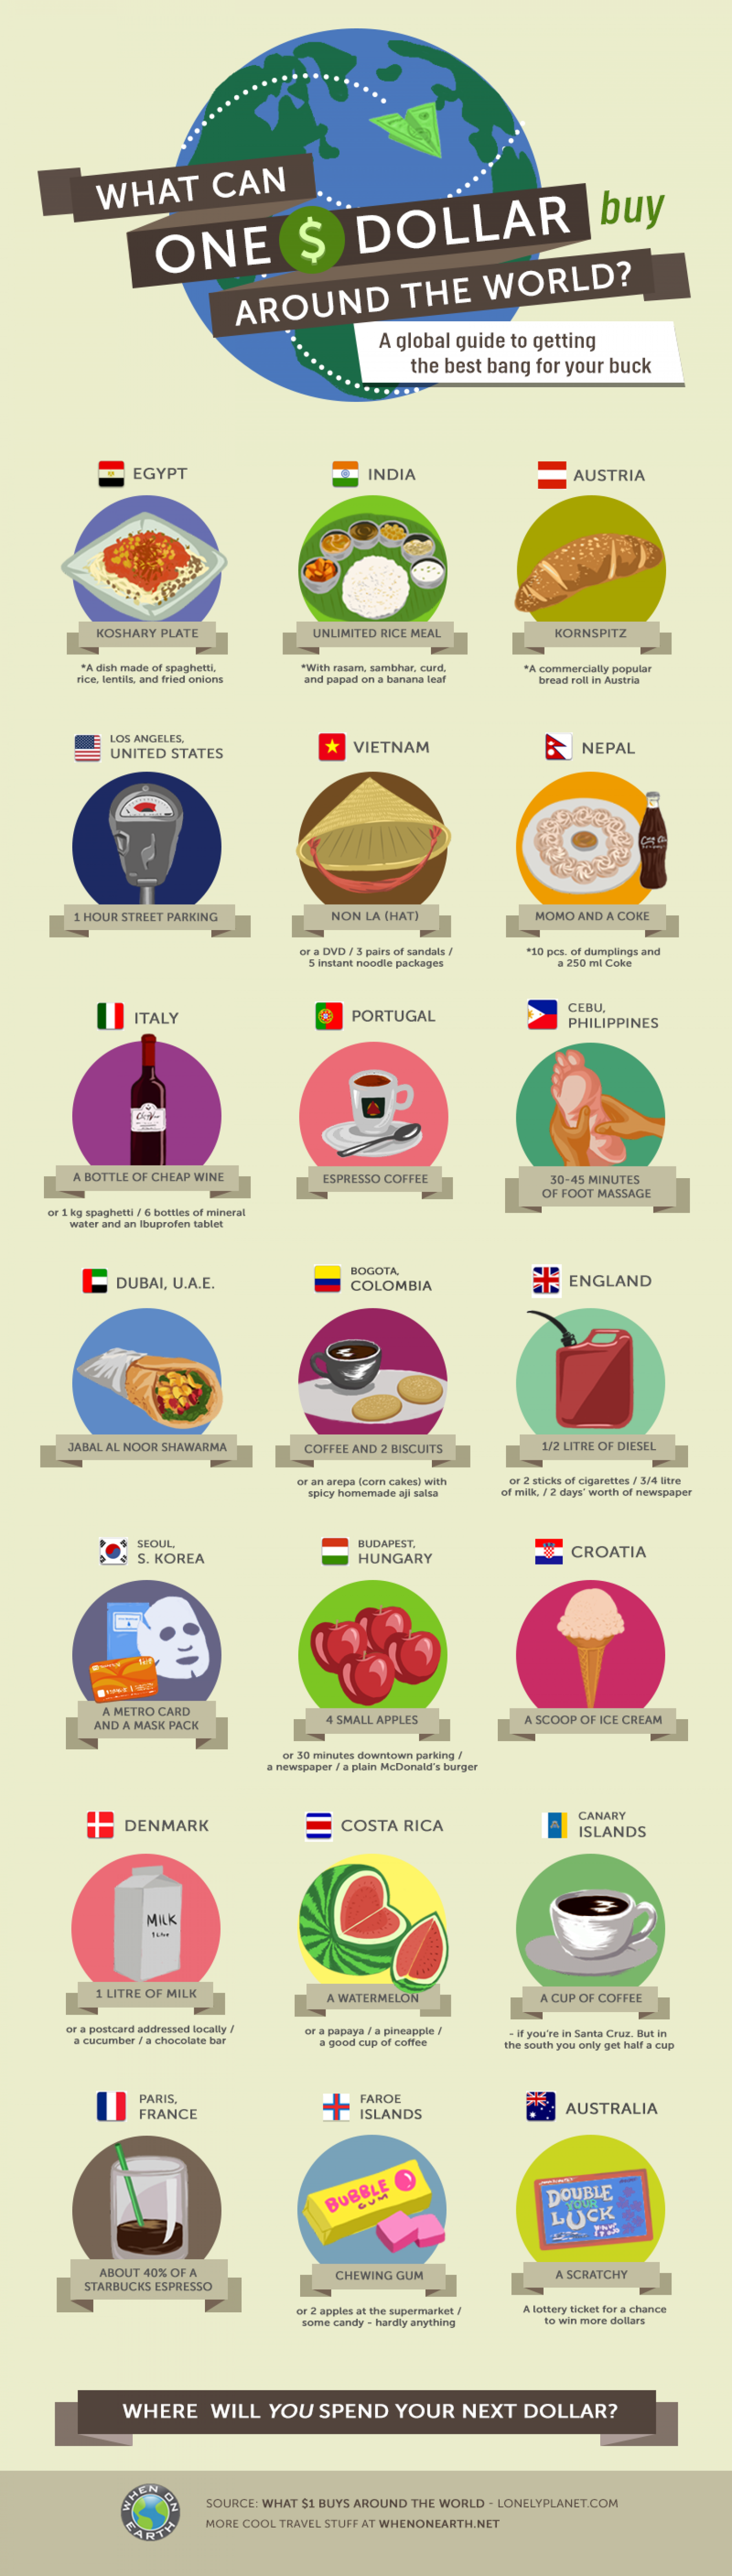 What can $1 buy around the world? Infographic